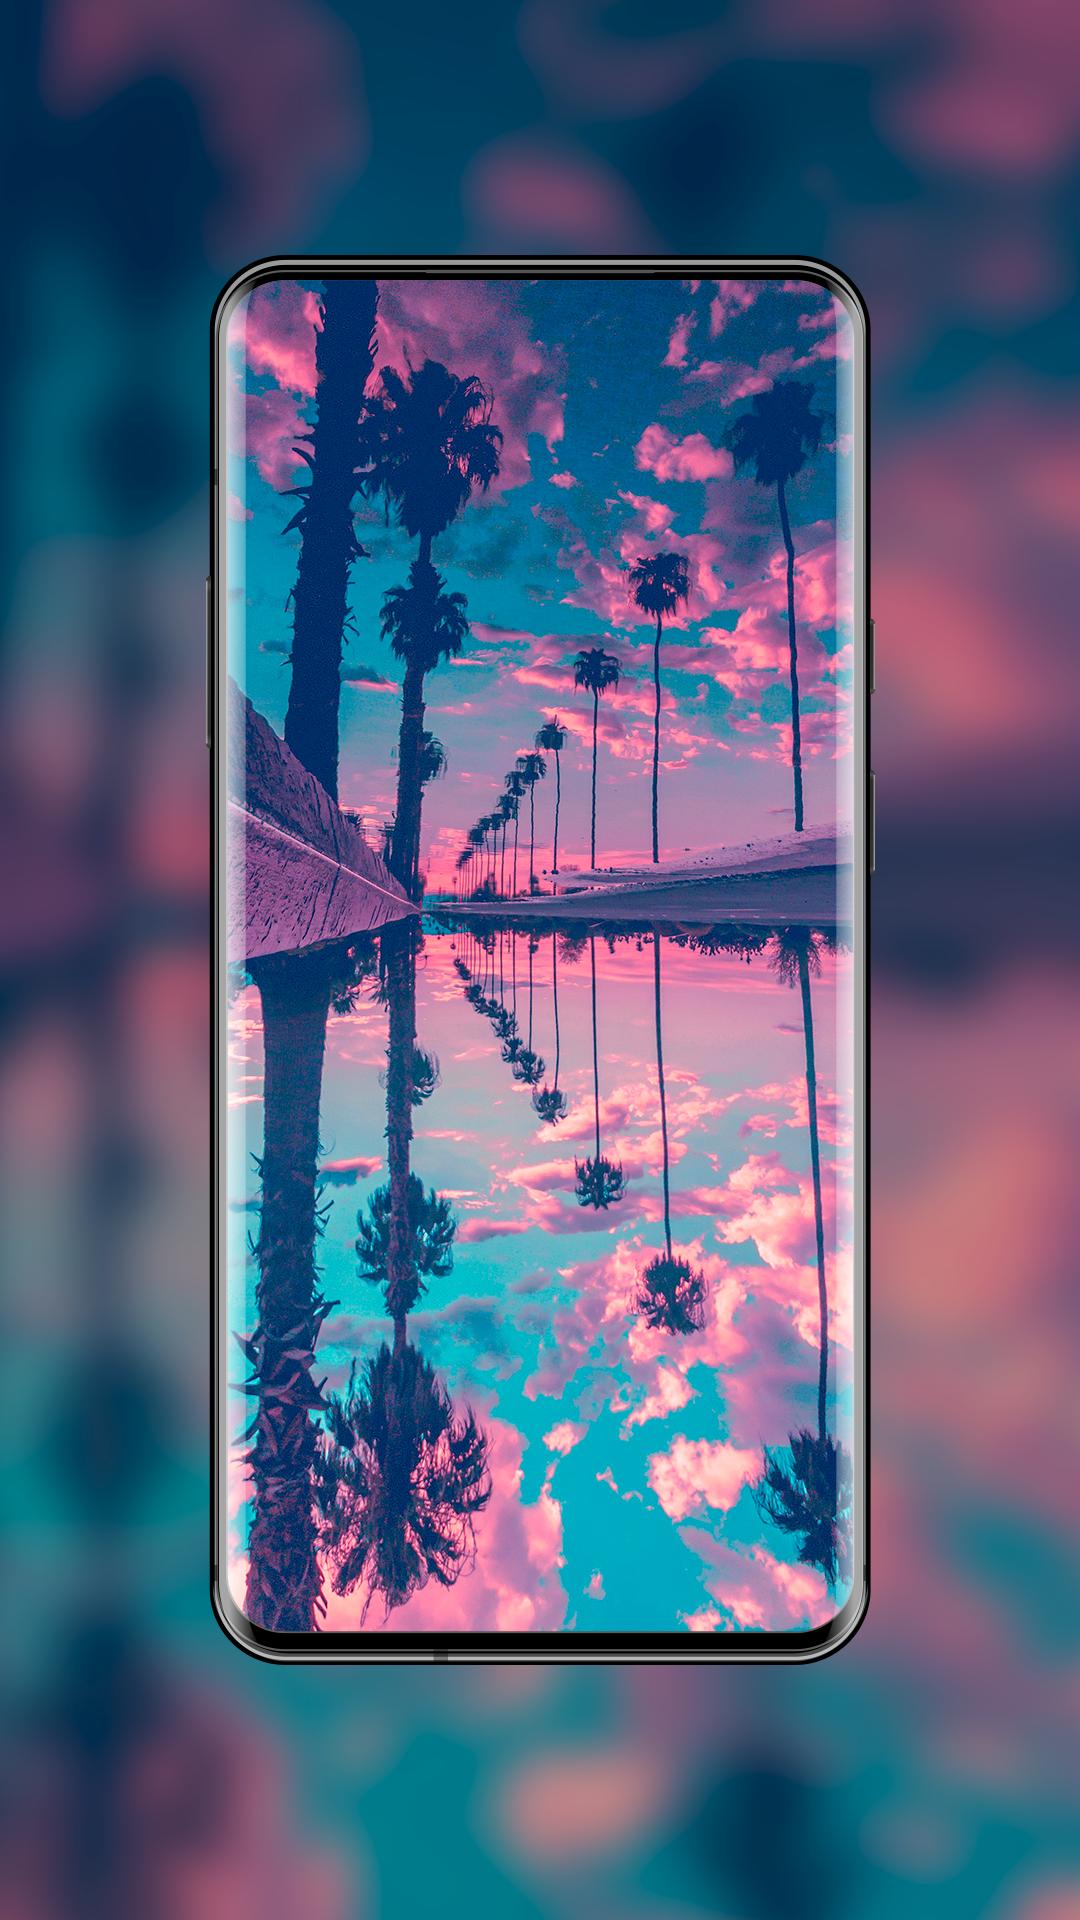  4K  Wallpapers  HD  QHD  Backgrounds  for Android APK  